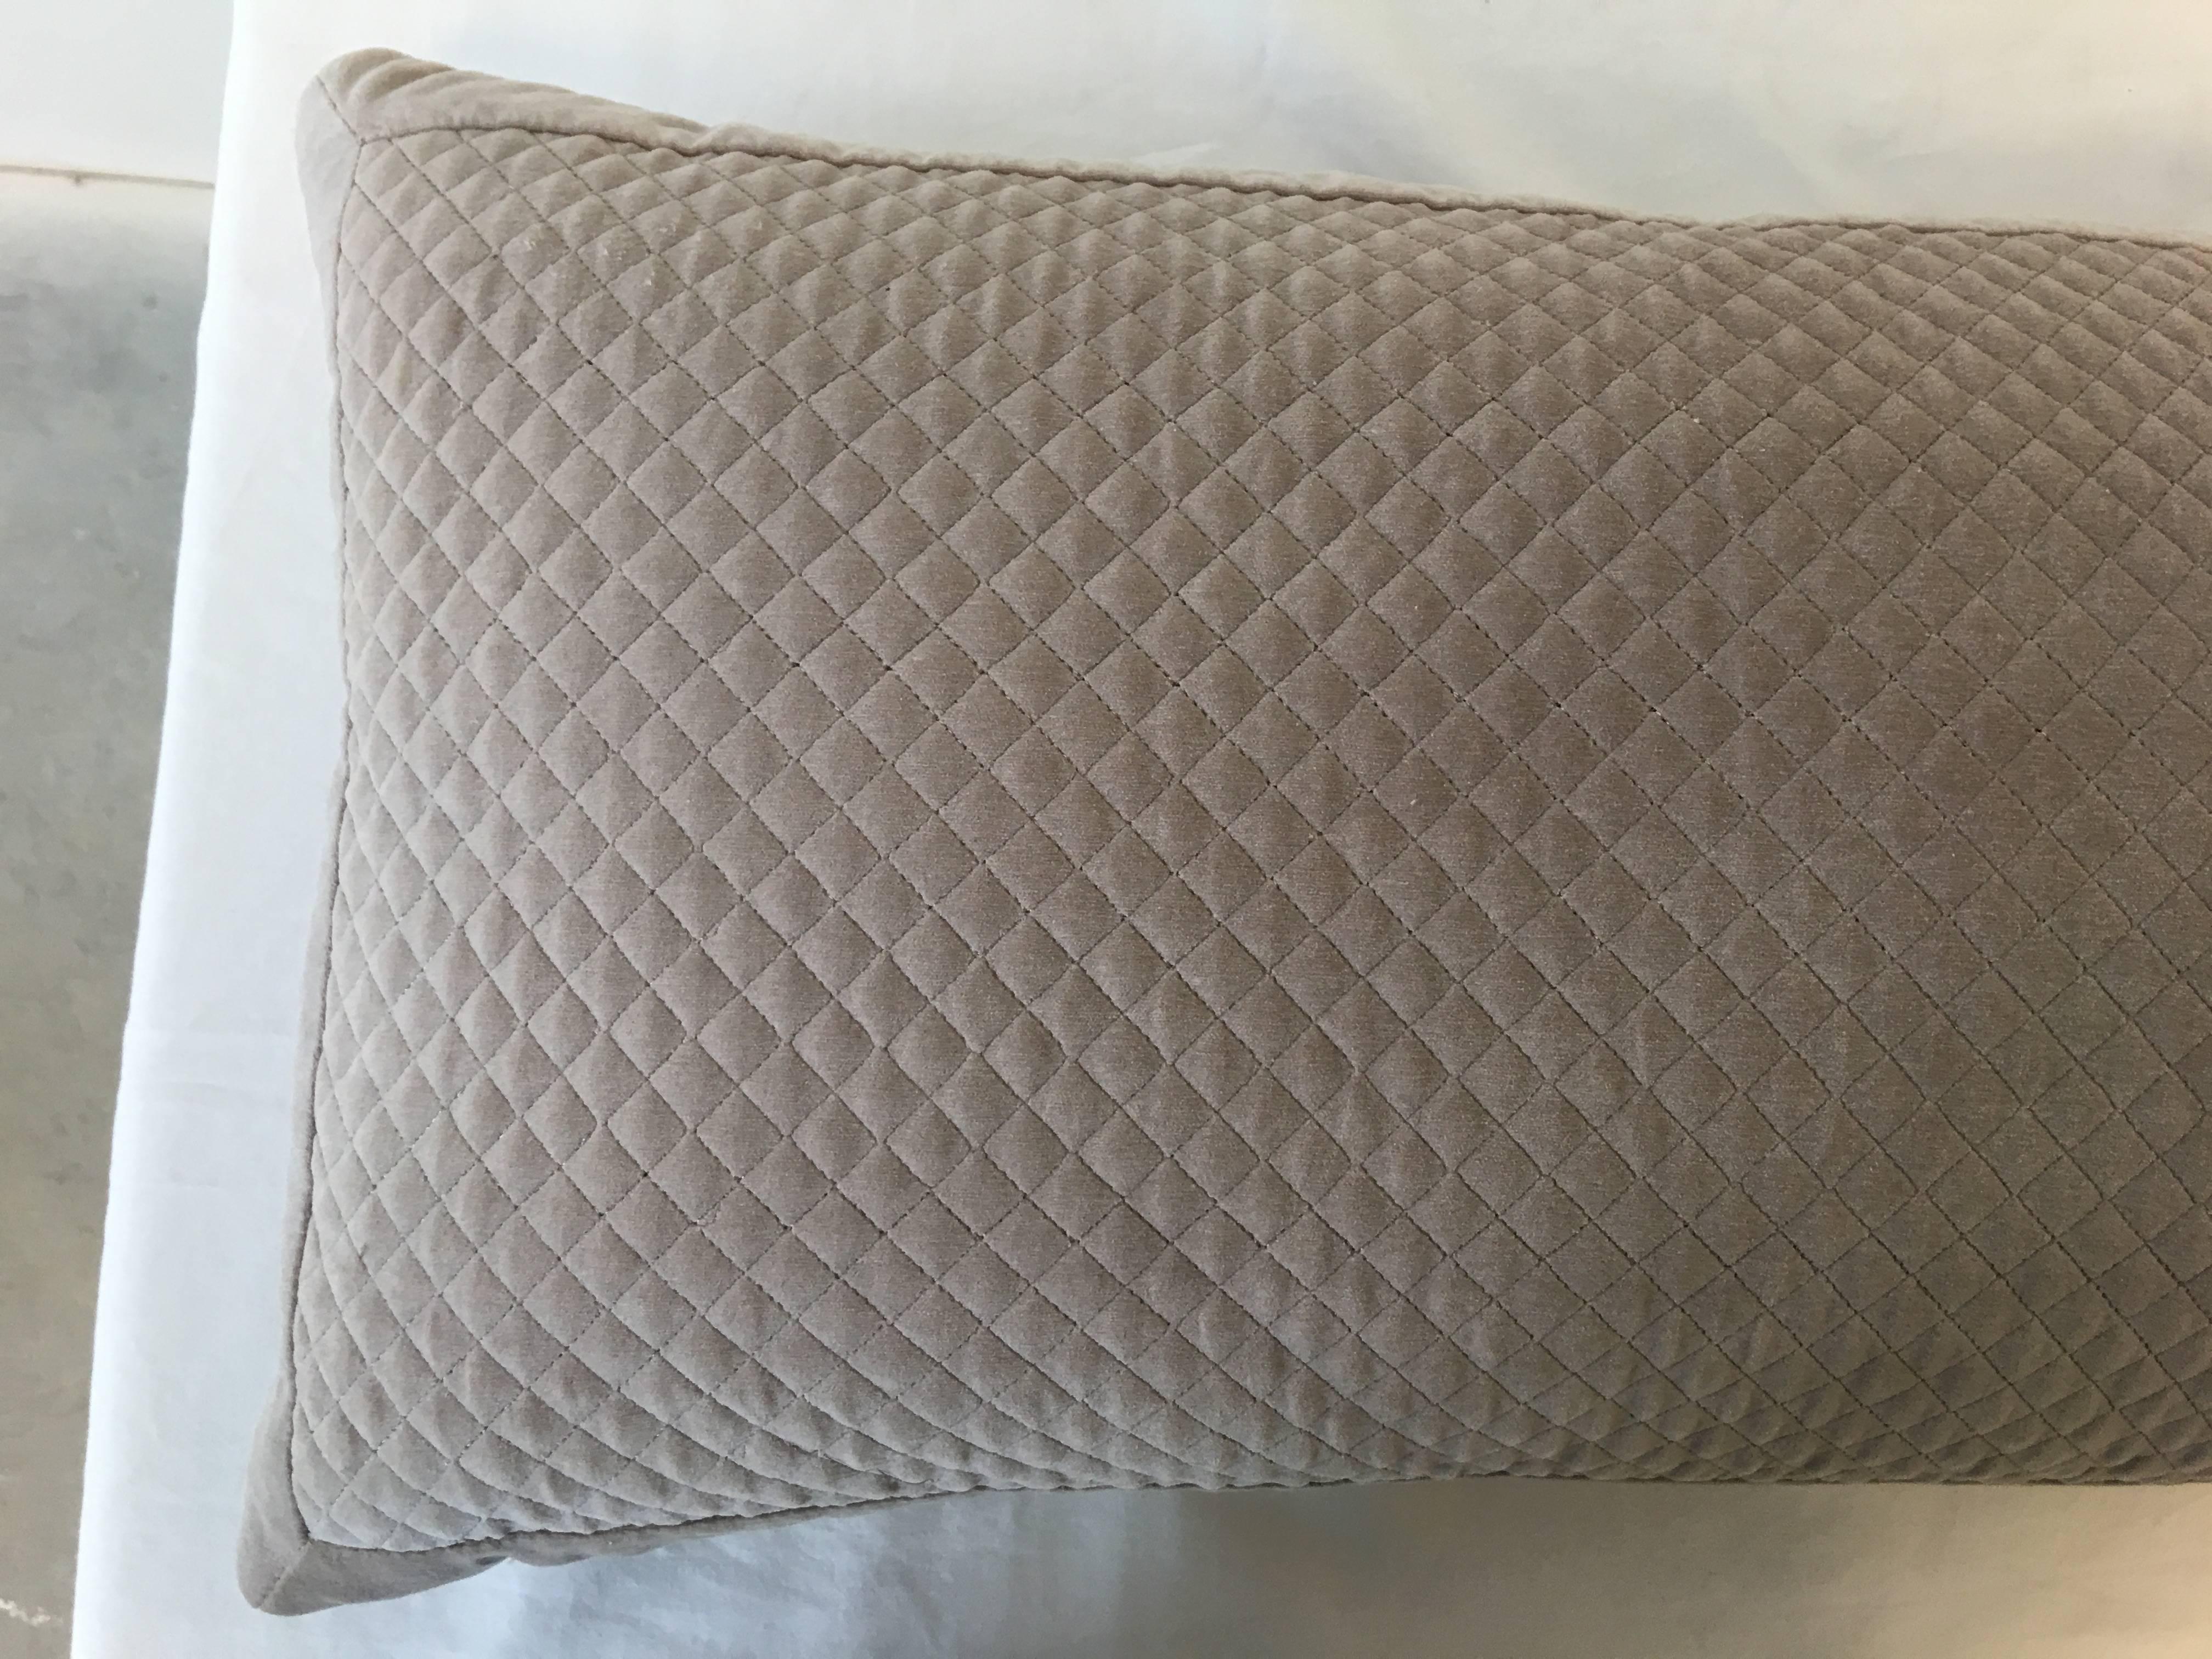 Offered is a gorgeous, modern taupe colored velvet accent pillow with a quilted pattern. Filled with down feathers. Slip covered, dry clean only.